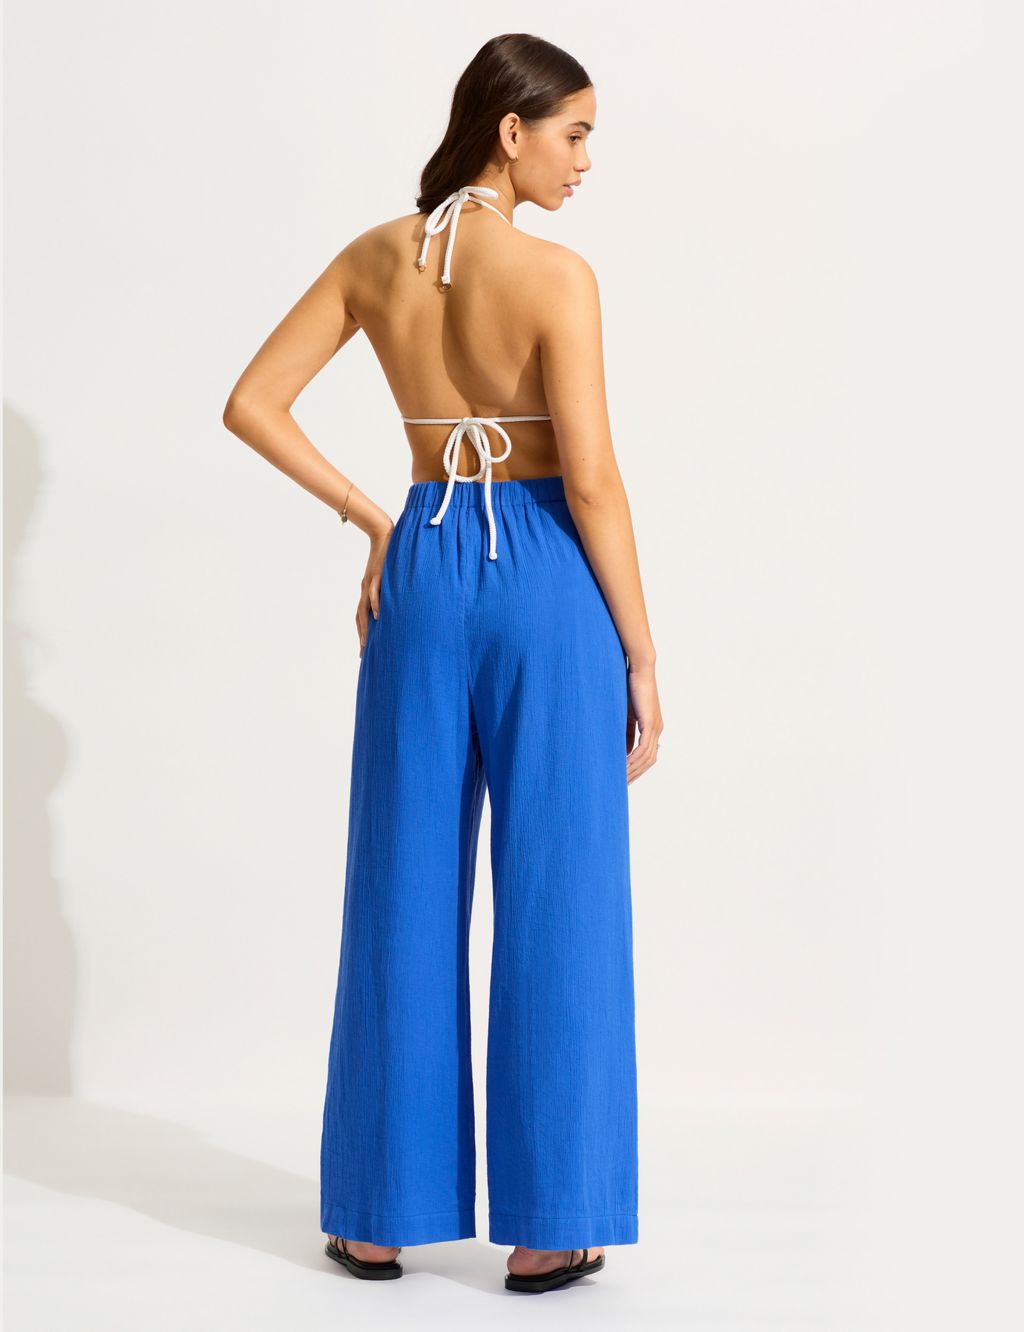 Crinkle Pure Cotton Relaxed Beach Trousers 1 of 4